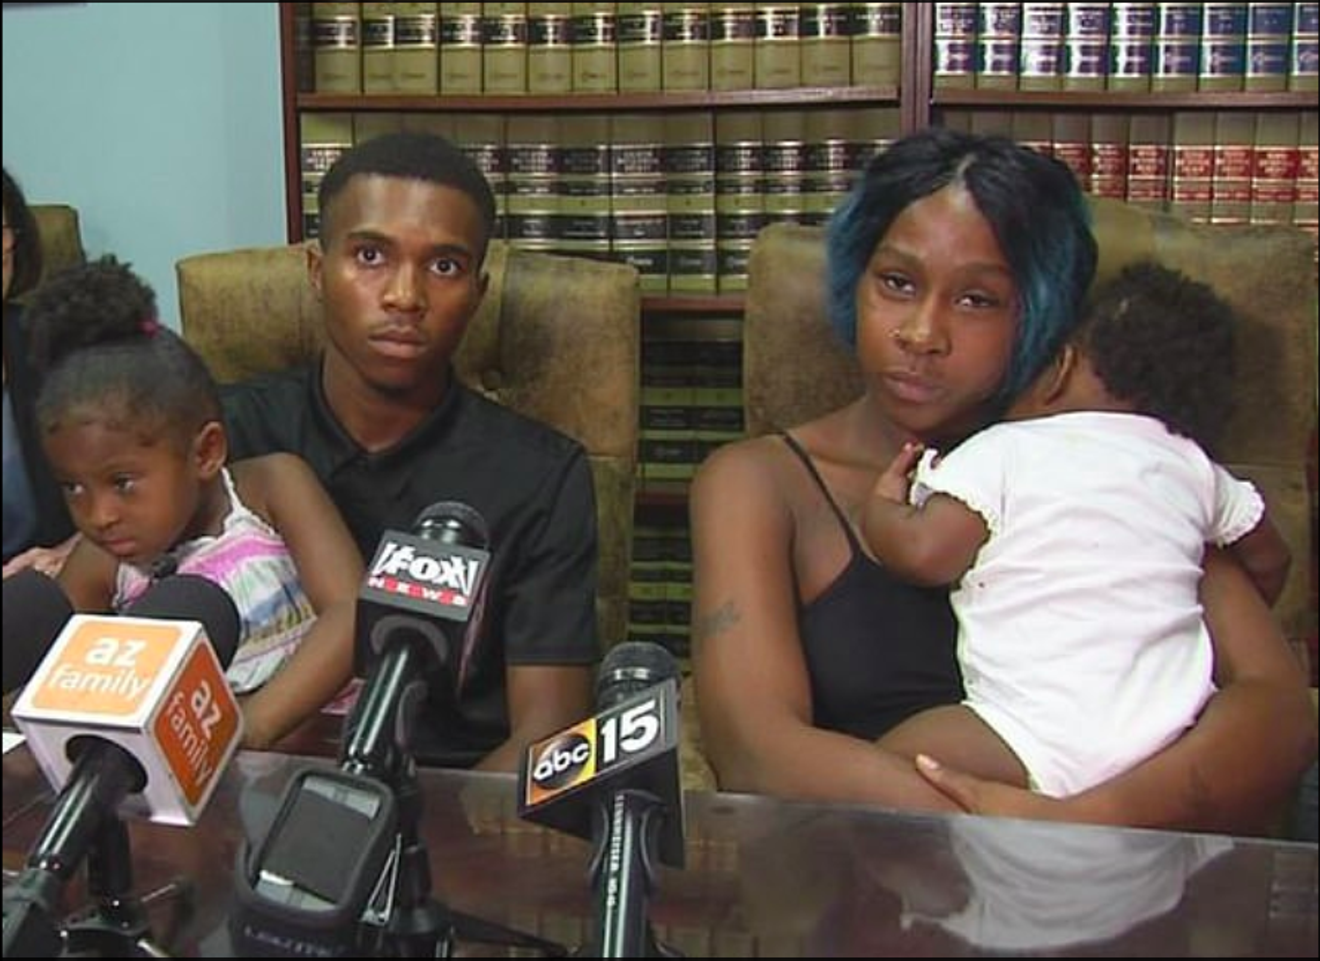 Dravon Ames, Iesha Harper, and their children at a press conference.